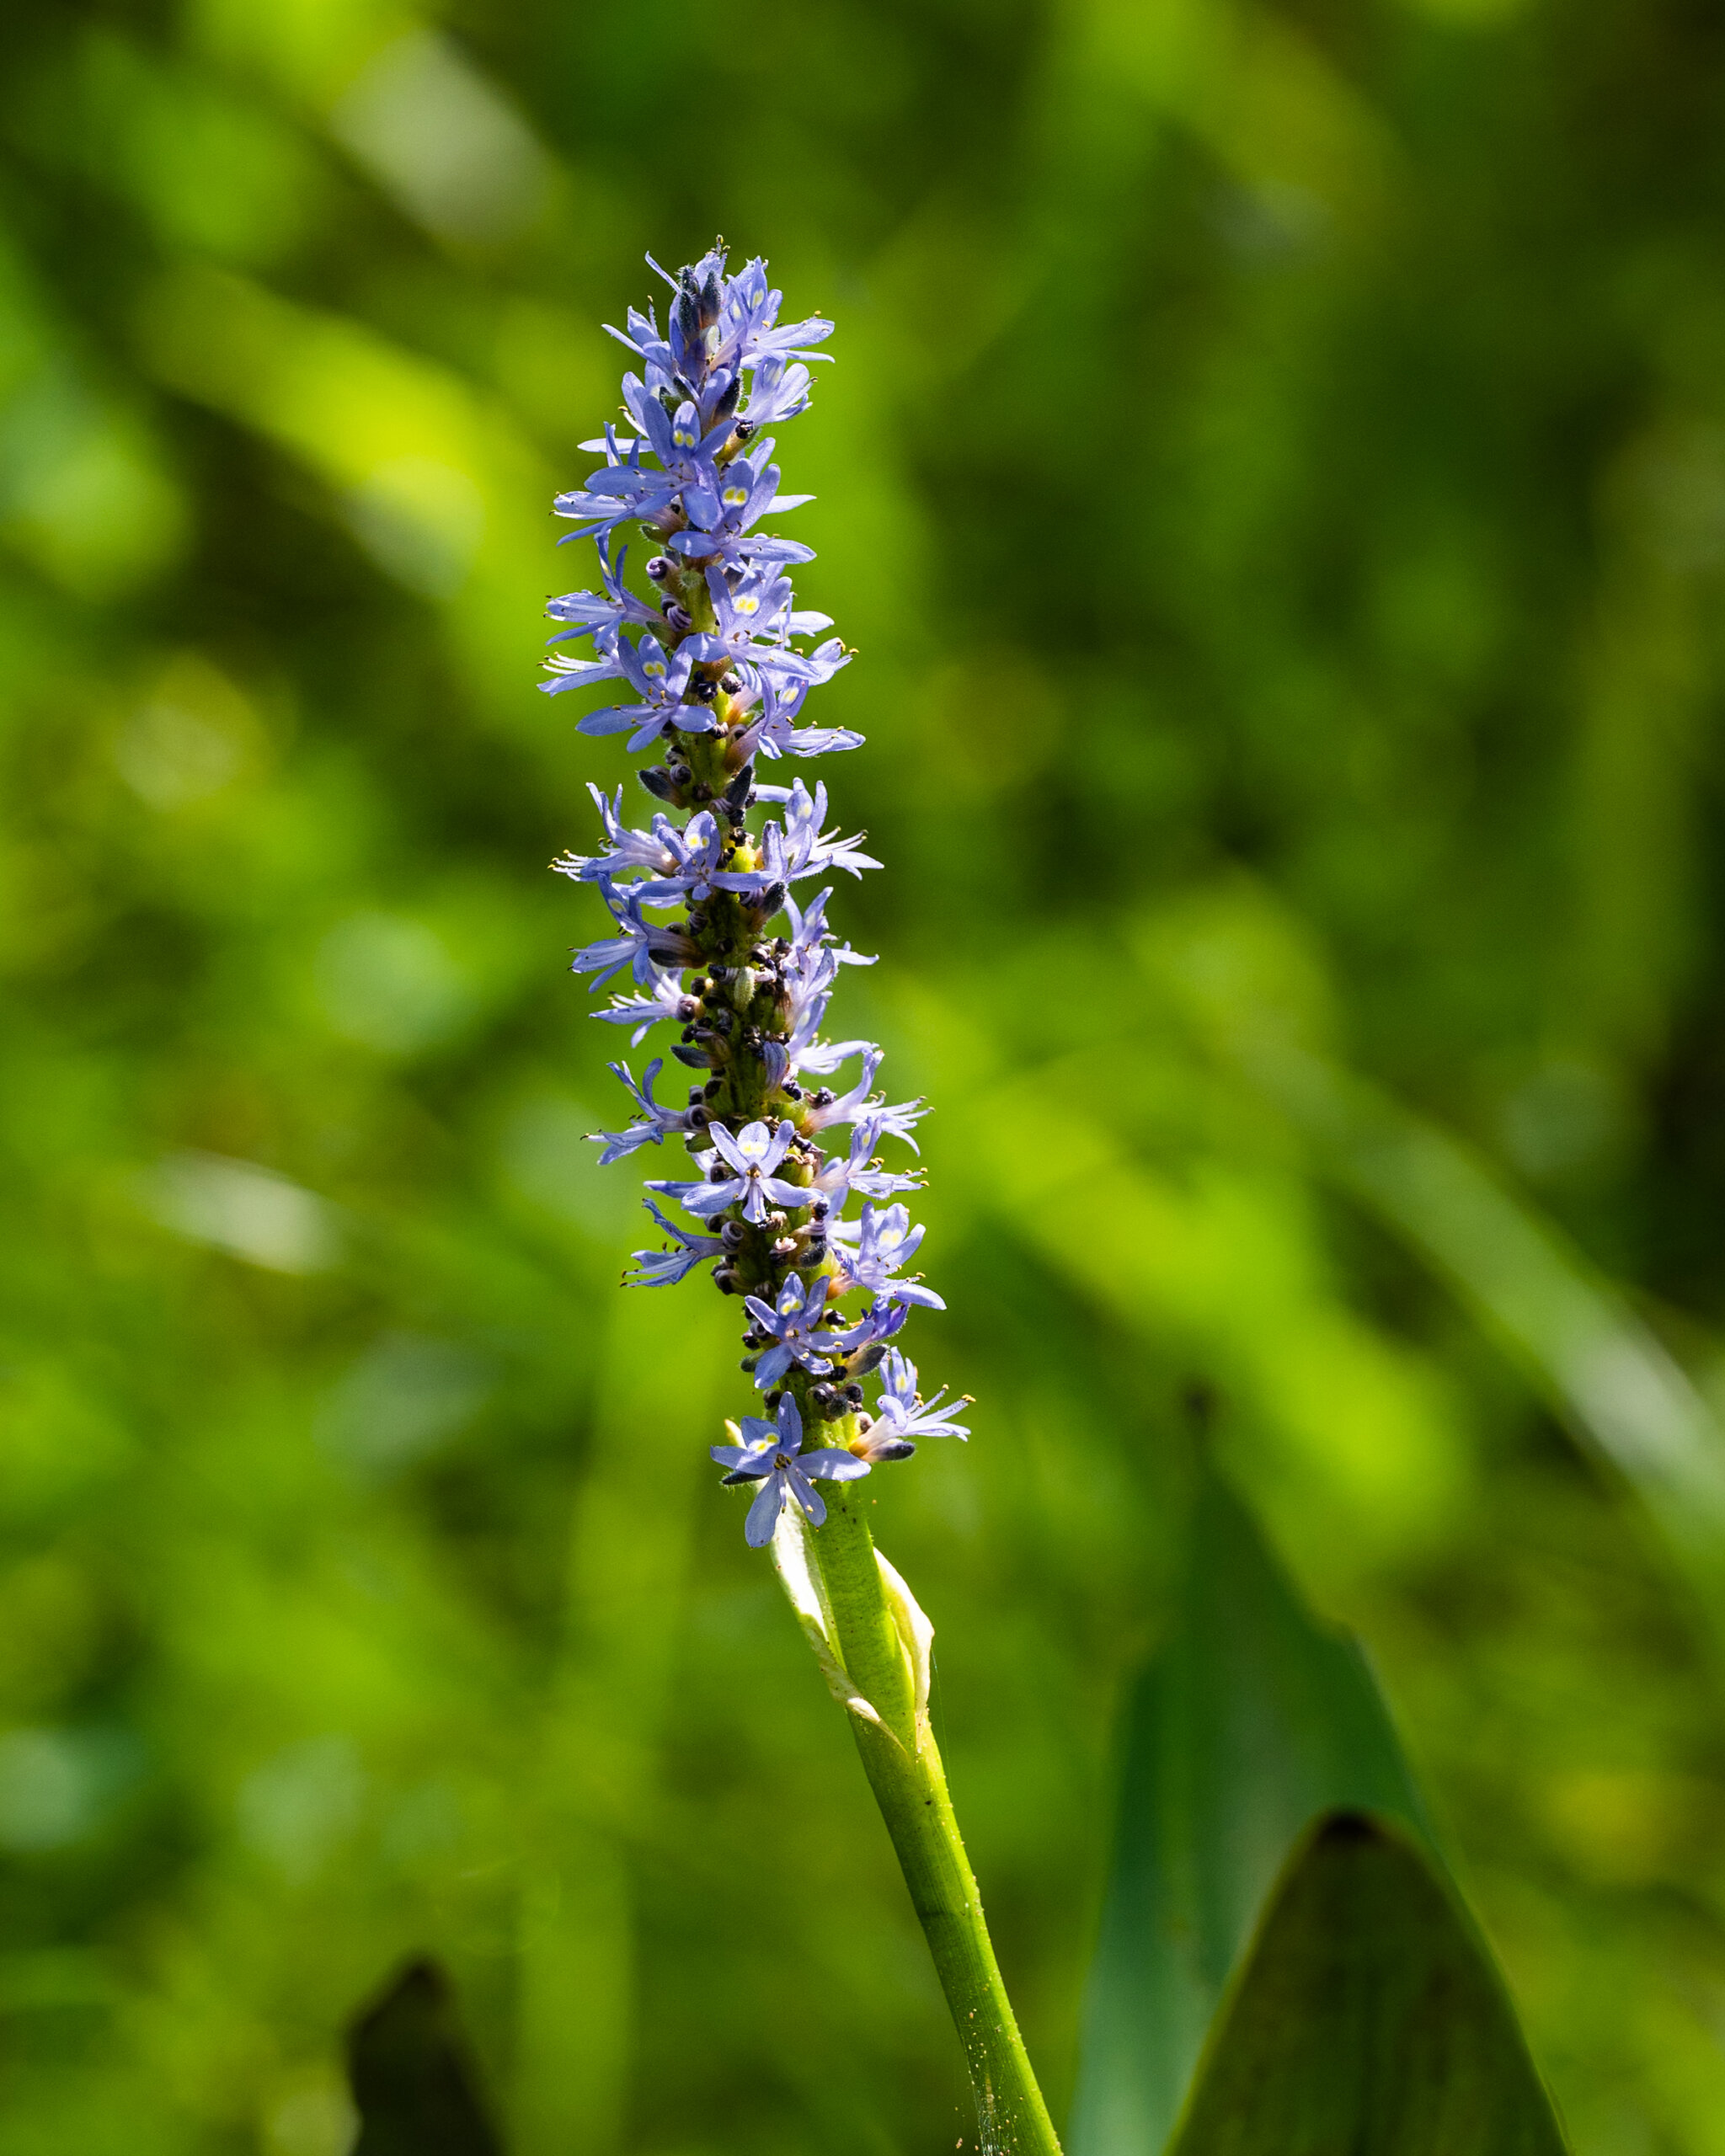 Detail of a pickerelweed flower